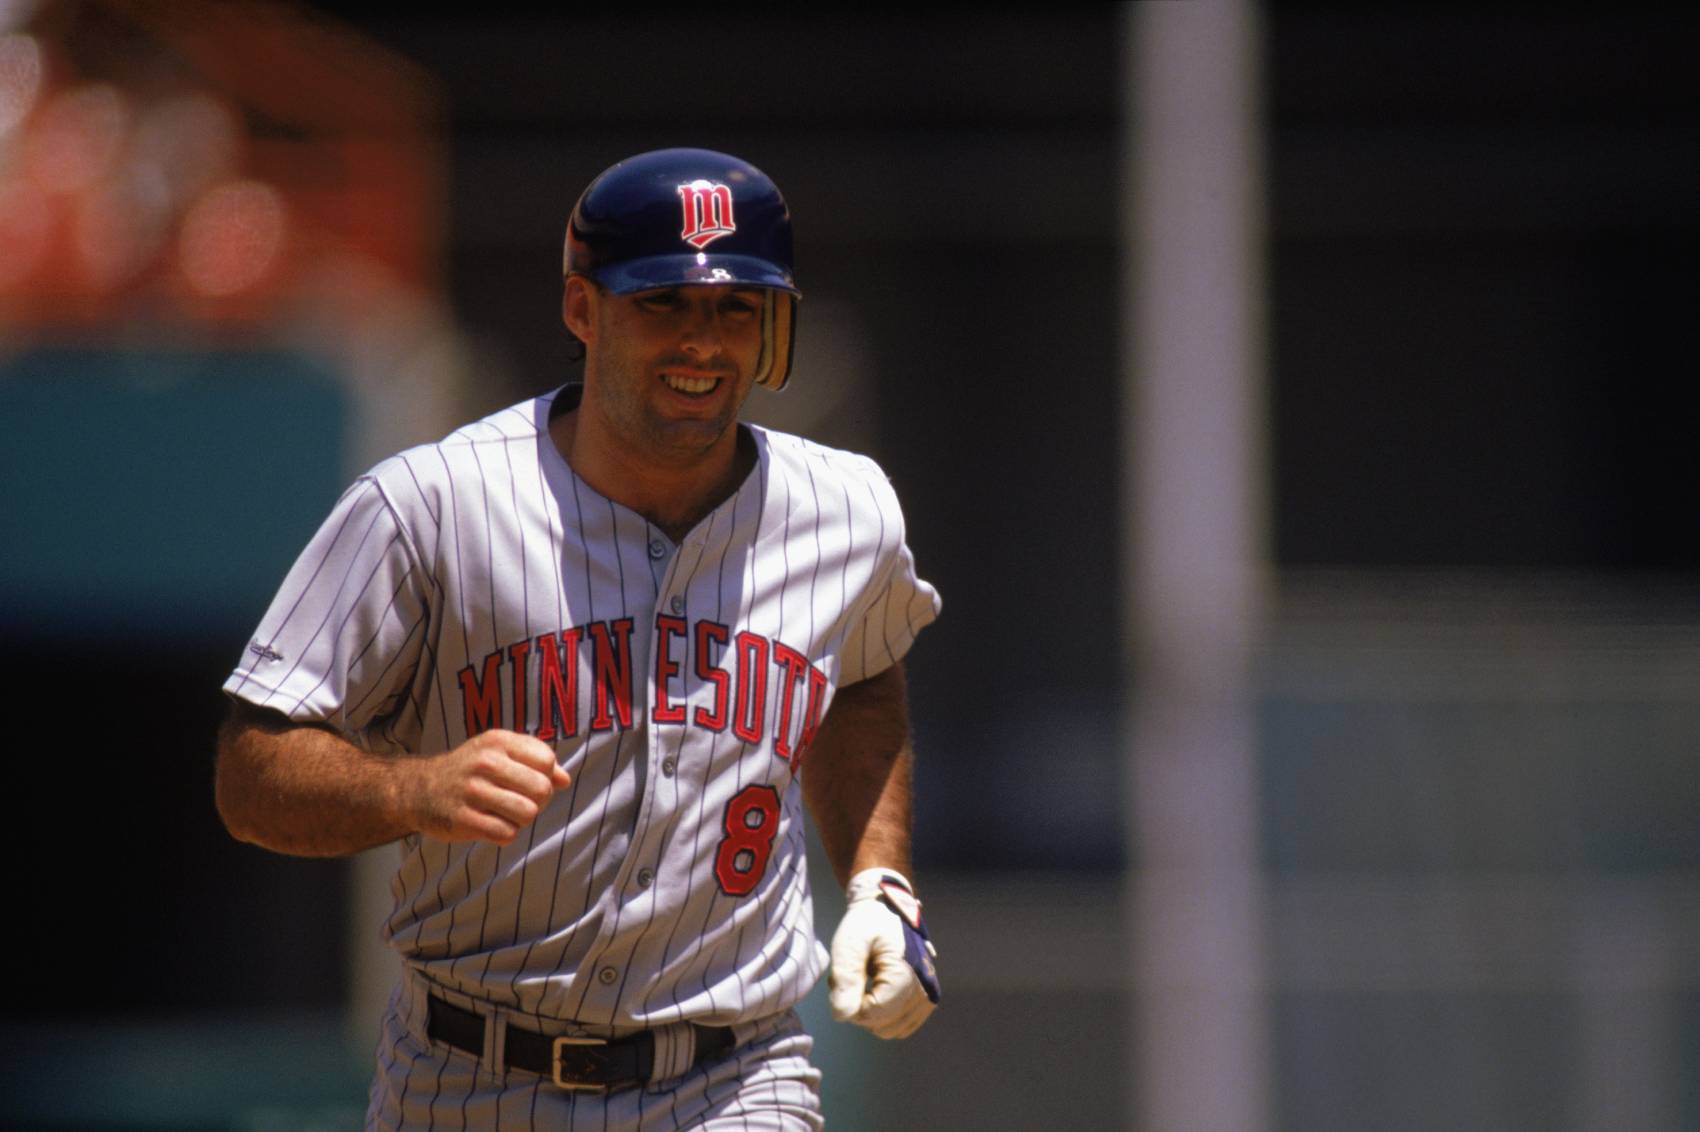 A devout Christian, Gary Gaetti's religious views divided the Minnesota Twins in the 1980s.